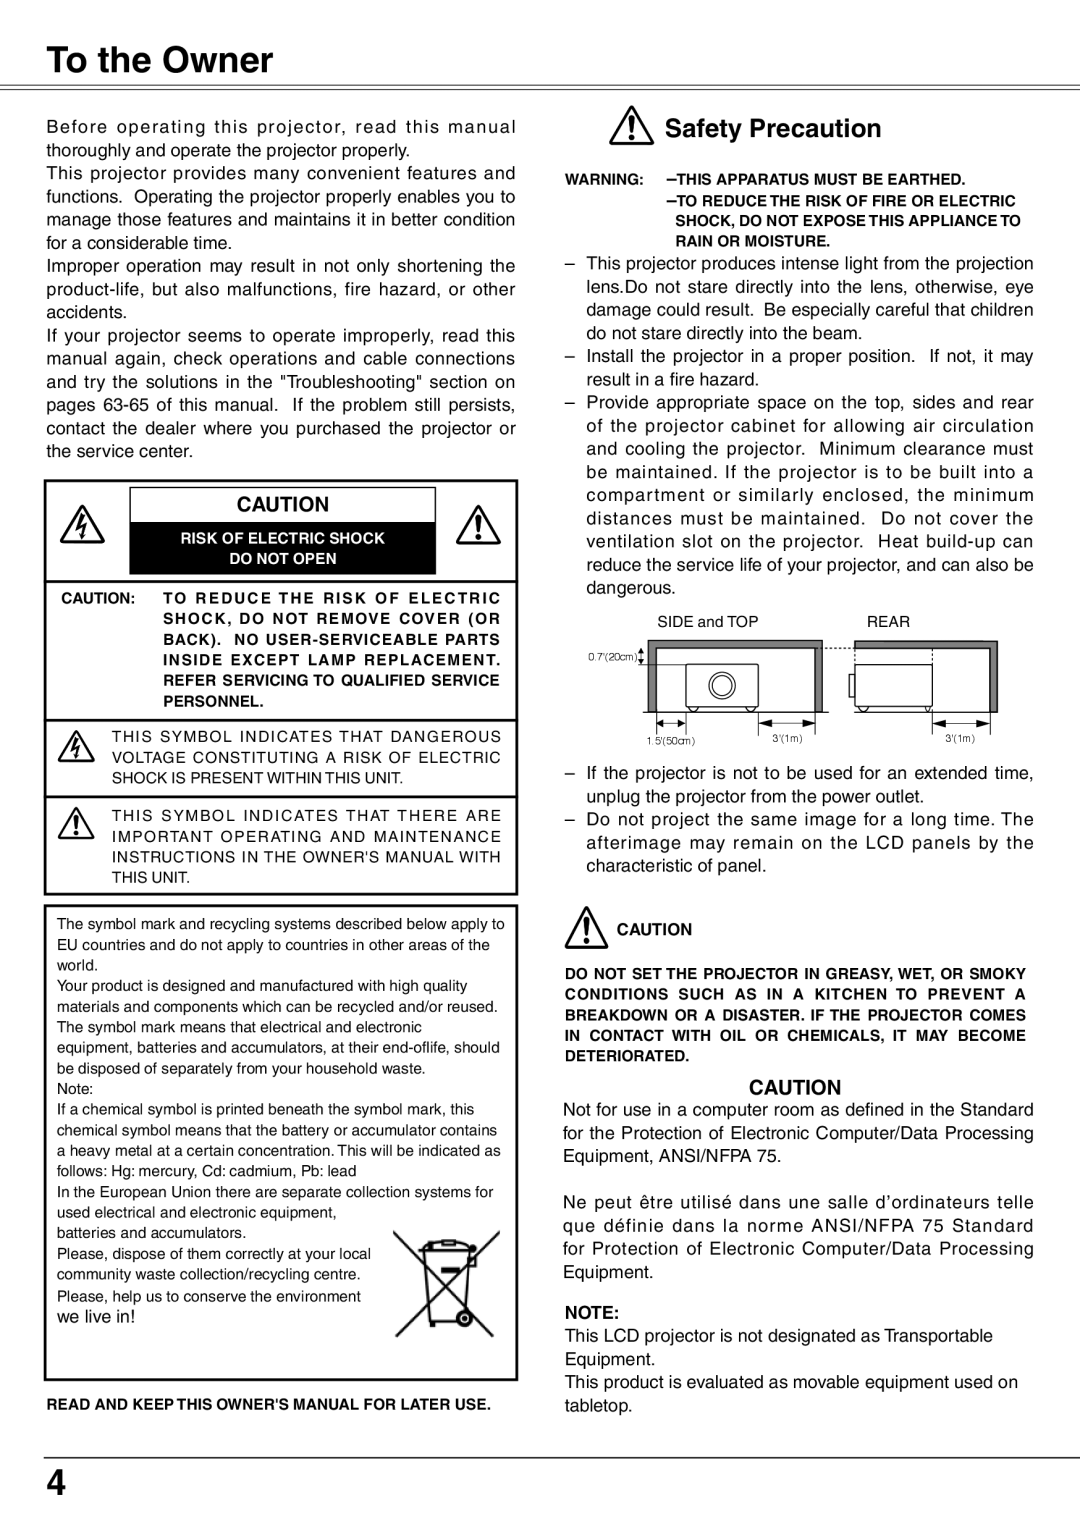 Eiki LC-XD25 owner manual To the Owner, Safety Precaution 